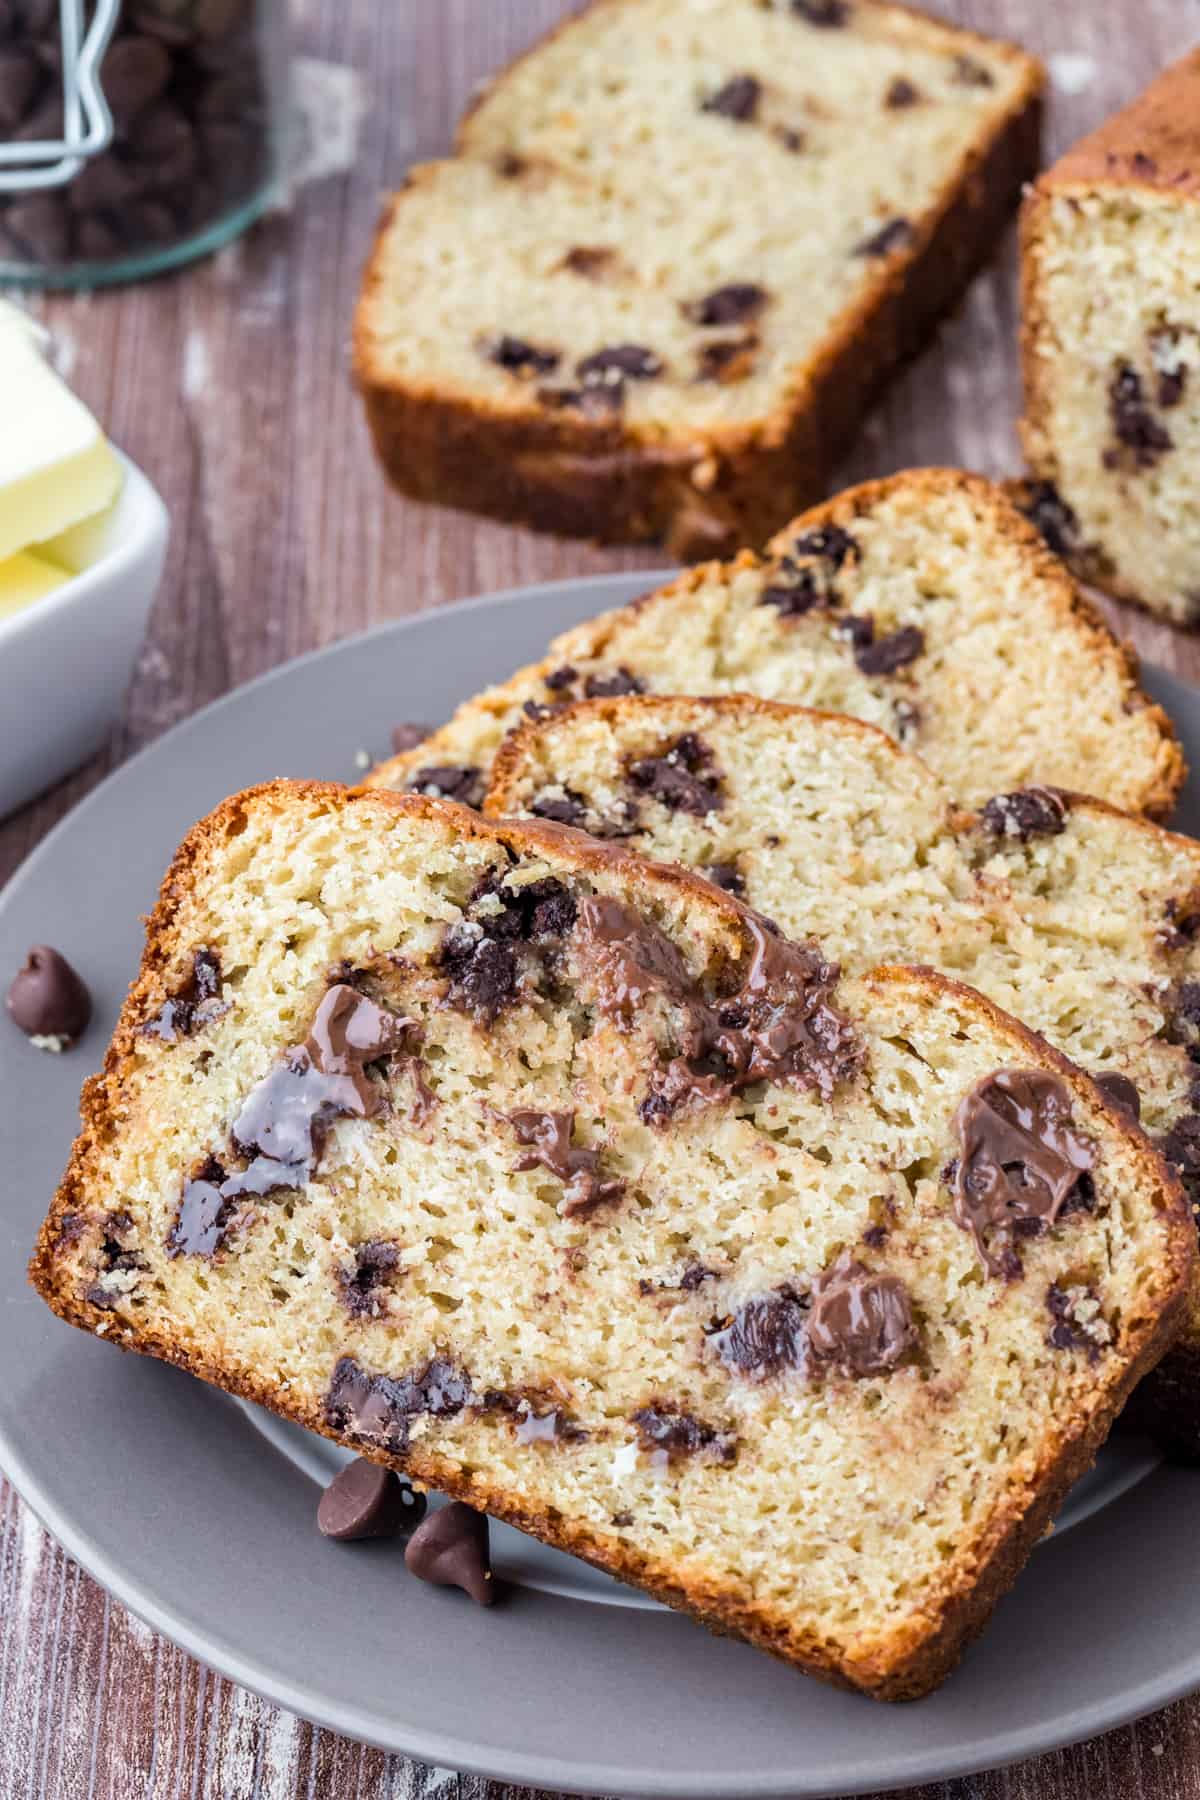 Slices of Chocolate Chip Banana Bread on grey plate showing melted chocolate chips.